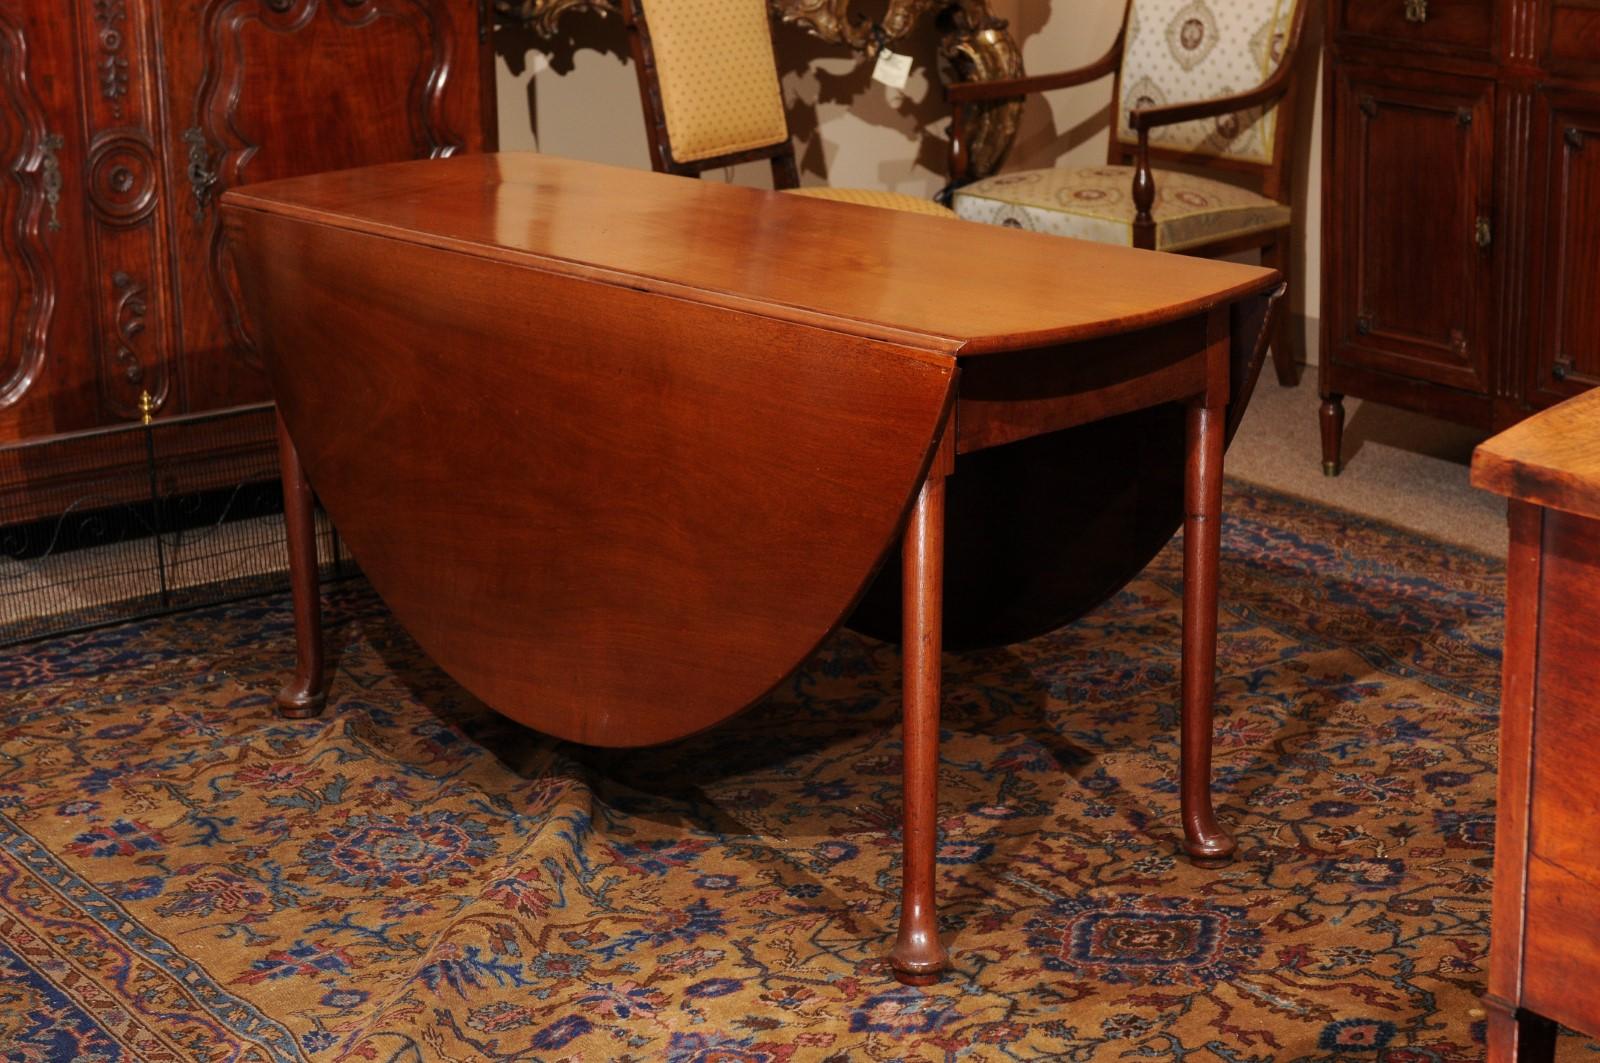  Mid-18th C English George II Mahogany Drop Leaf Oval Dining Table with Pad Feet (Table de salle à manger ovale à feuilles tombantes et pieds pad) en vente 2